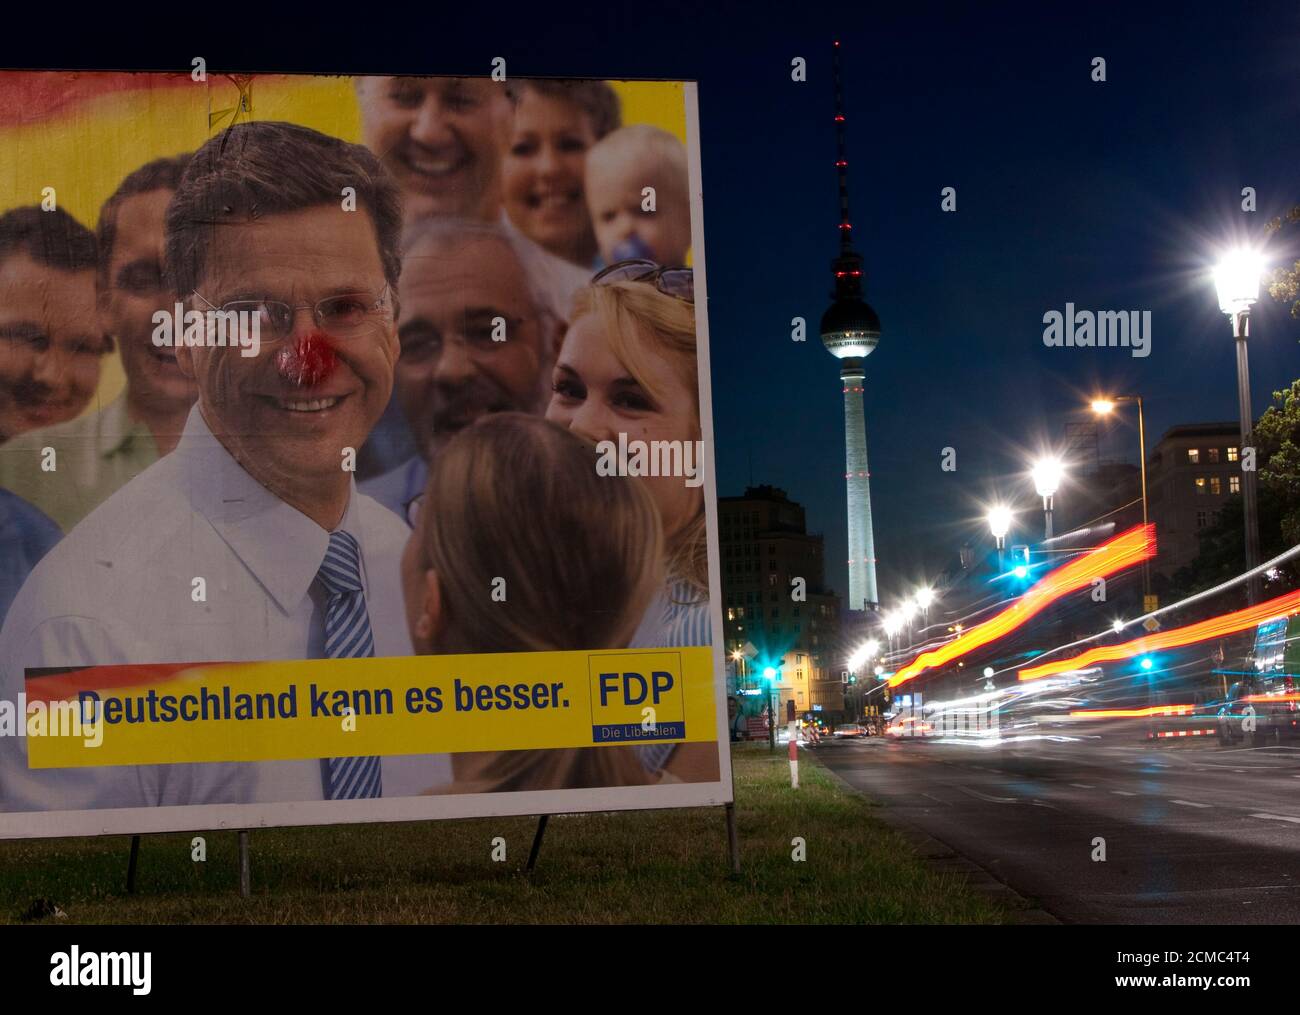 An election poster of the liberal FDP party shows its party leader Guido Westerwelle near the Fernsehturm television tower in Berlin  August 31, 2009.   REUTERS/Thomas Peter  (GERMANY POLITICS ELECTIONS) Foto de stock